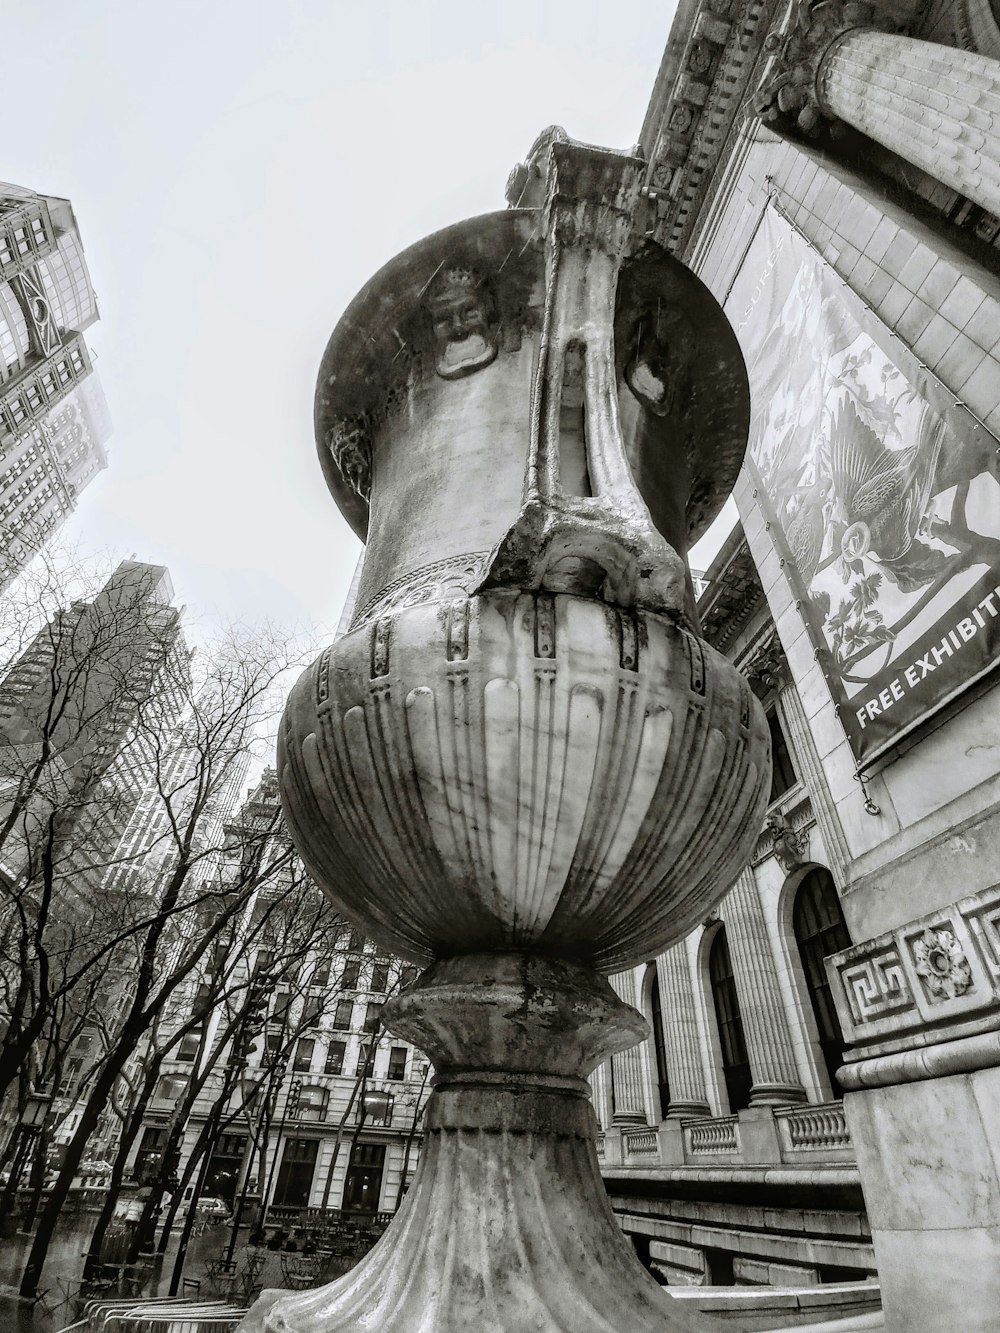 a black and white photo of a large vase in front of a building